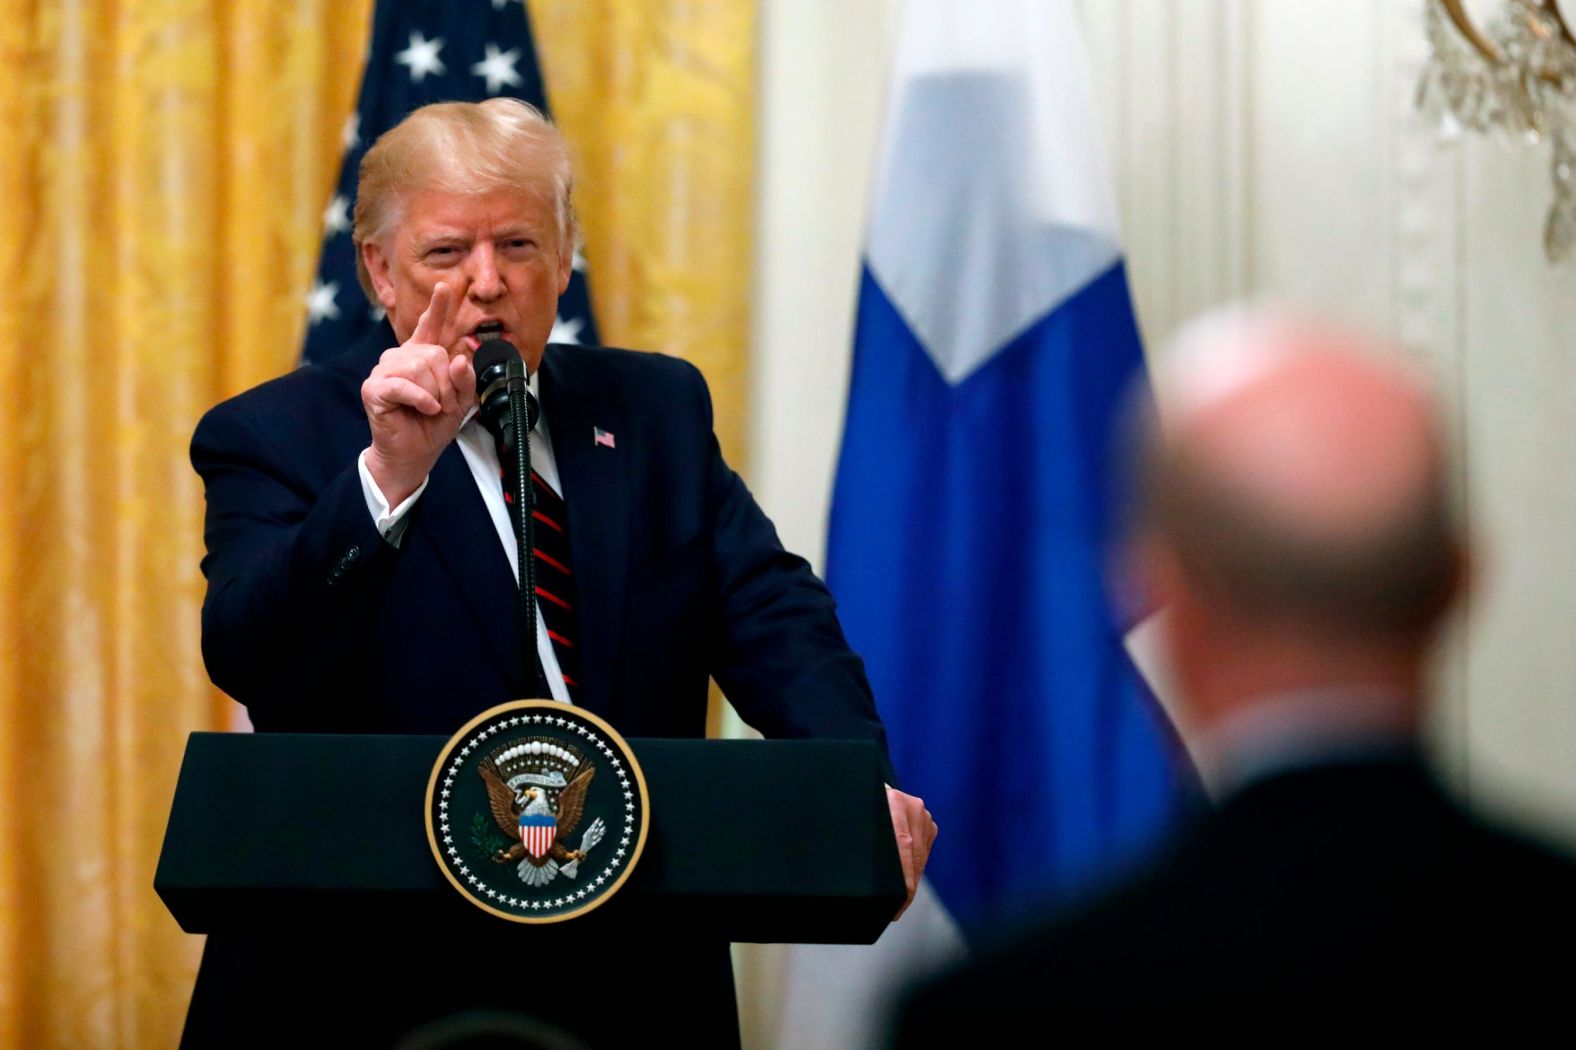 Trump was asked about the scandal during a White House news conference on October 2. "The whistleblower is very inaccurate," Trump said. <a href="https://www.cnn.com/2019/10/02/politics/president-donald-trump-impeachment-democrats-pompeo/index.html" target="_blank">He vented to the press</a> with the visiting Finnish President in attendance. "This is a fraudulent crime on the American people," Trump said.